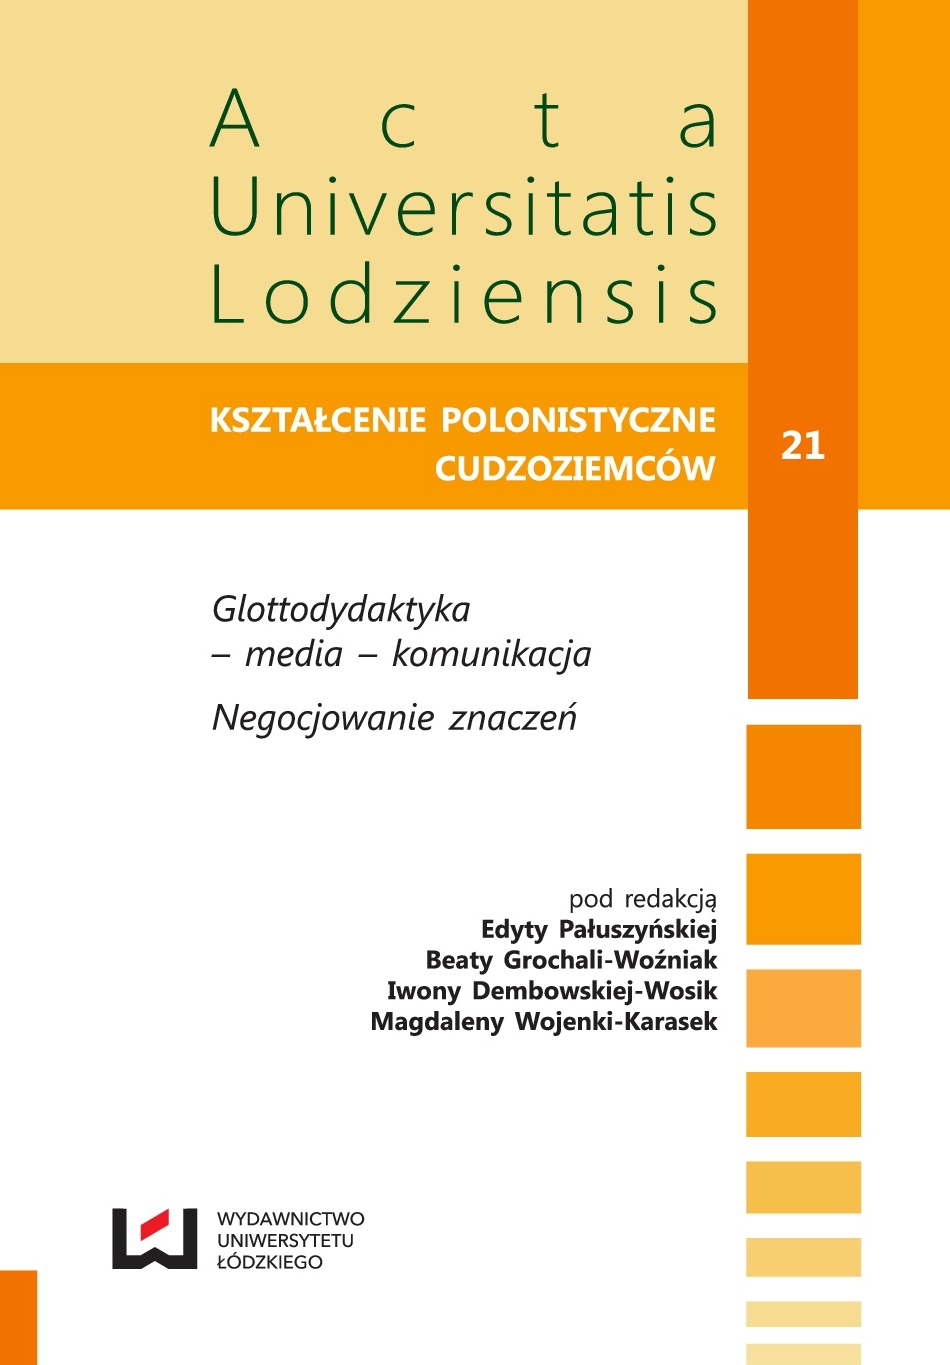 THE NOTION OF IMAGE (WIZERUNEK) AND ITS RELATIONS TO GLOTTODIDACTICS (BASED ON THE IMAGE OF ŁÓDŹ IN CHICAGO’S “DZIENNIK ZWIĄZKOWY”) Cover Image